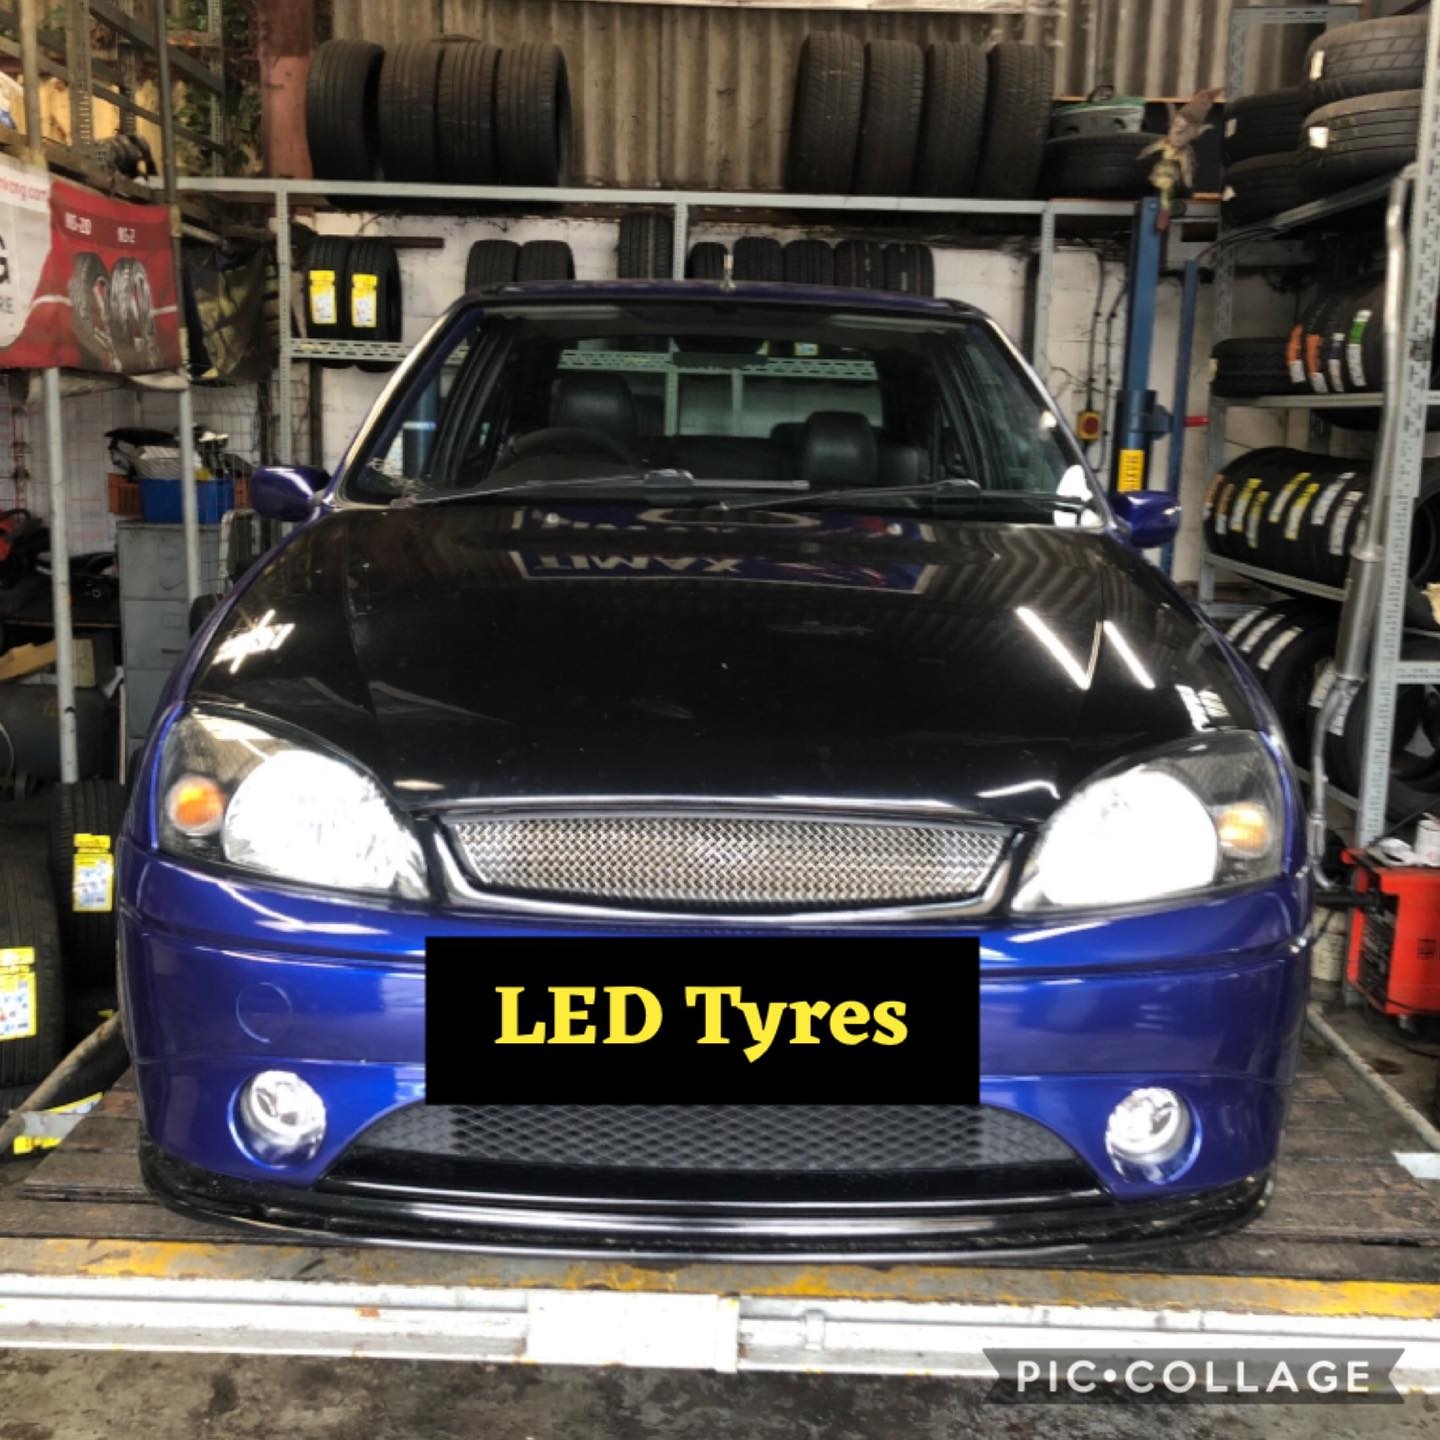 Led Tyres